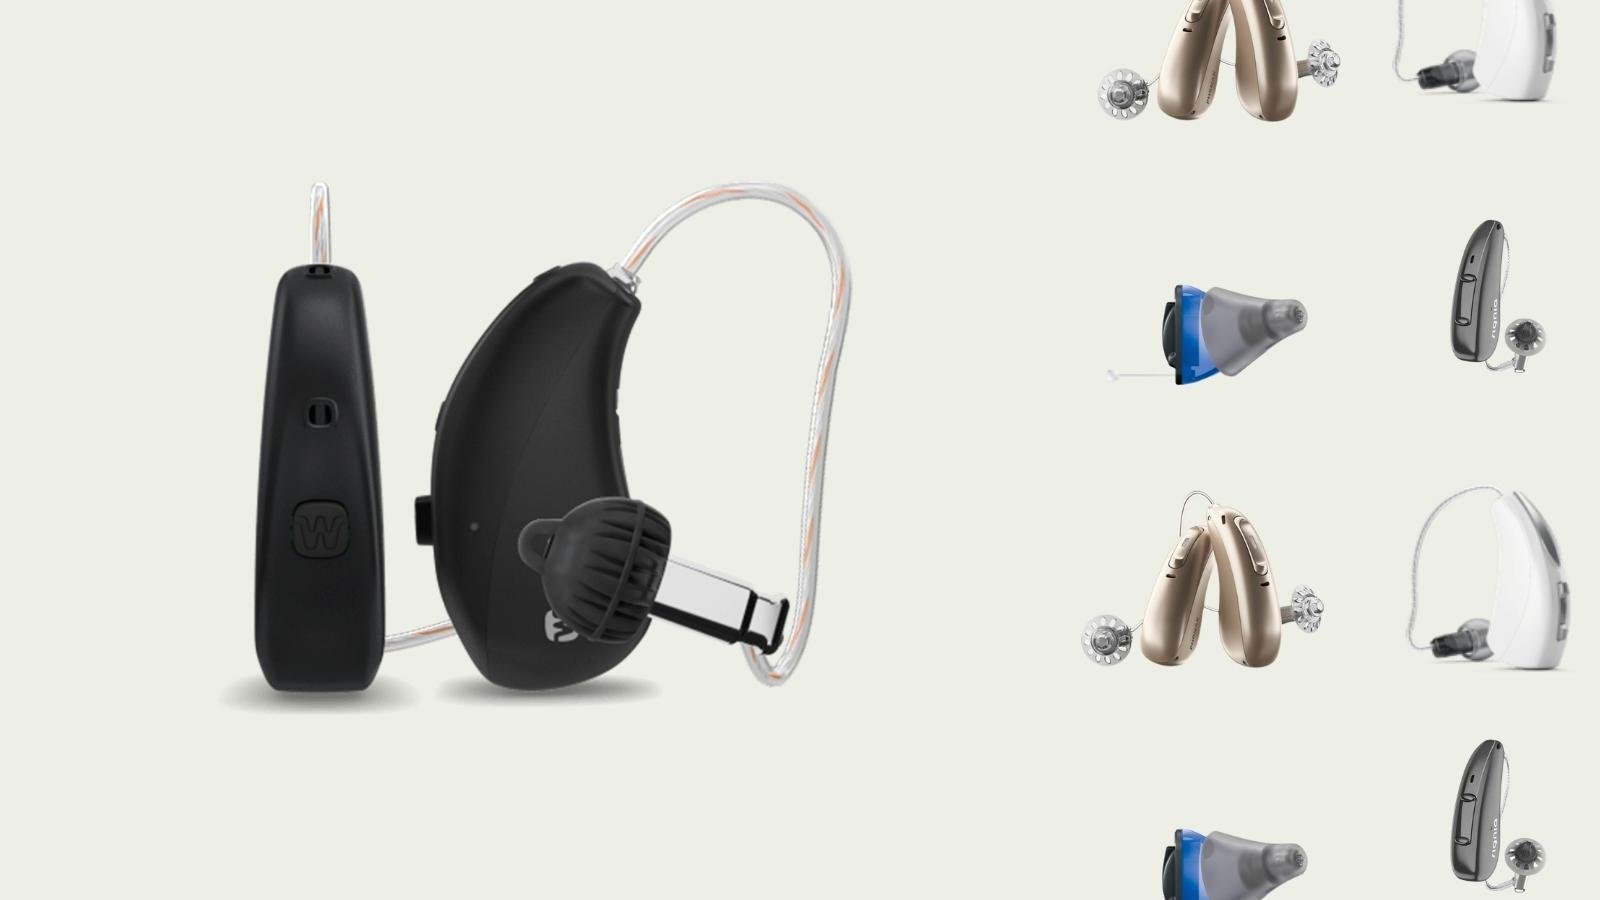 Image of Widex moment hearing aids compared to hearing aids from Signia and Phonak